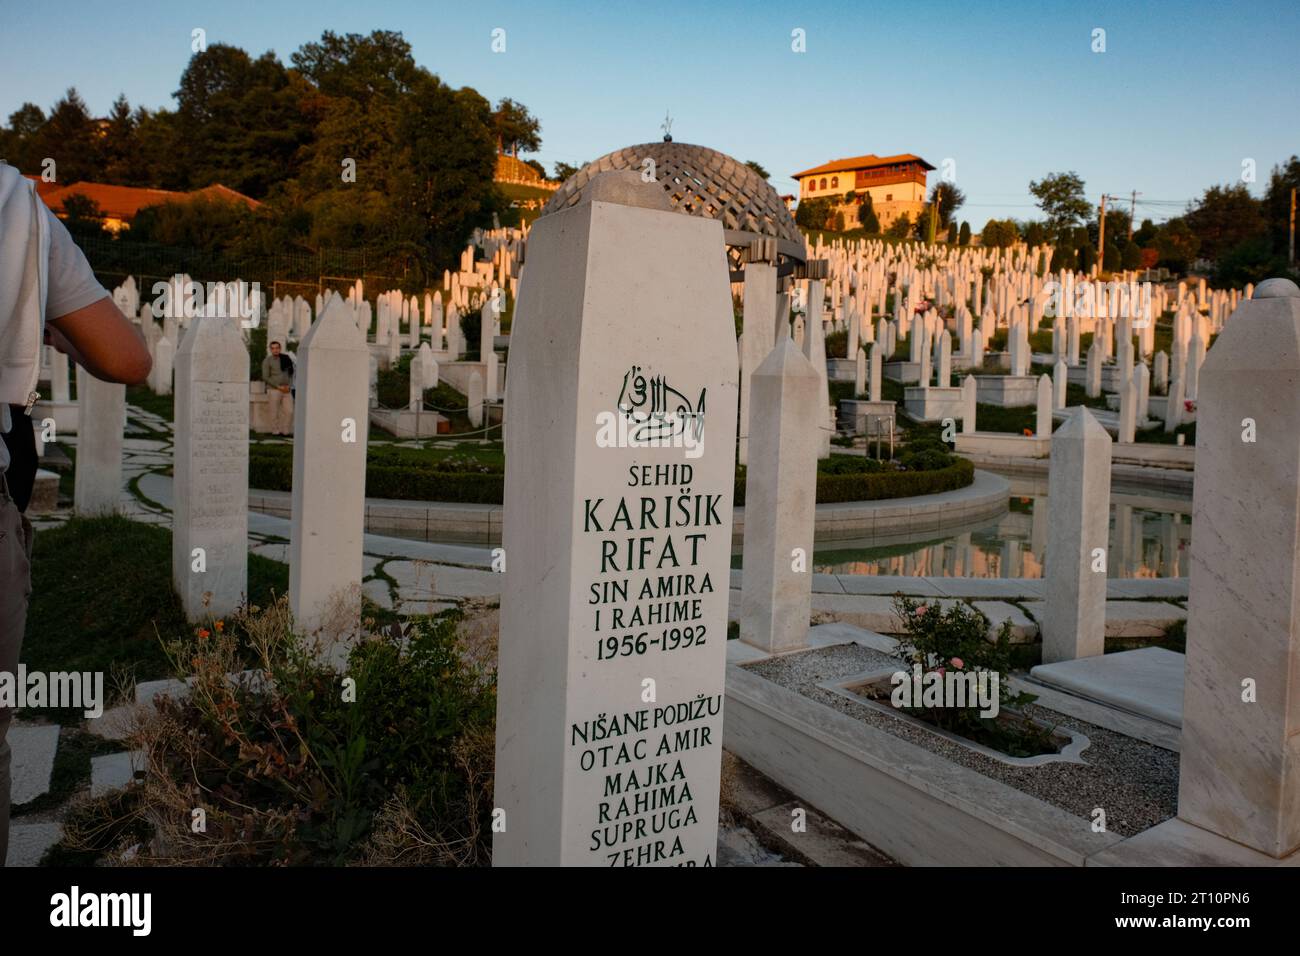 A single soldier's tombstone stands resolute in the soft glow of sunset, a poignant tribute to bravery and sacrifice in Sarajevo's hallowed grounds. Stock Photo